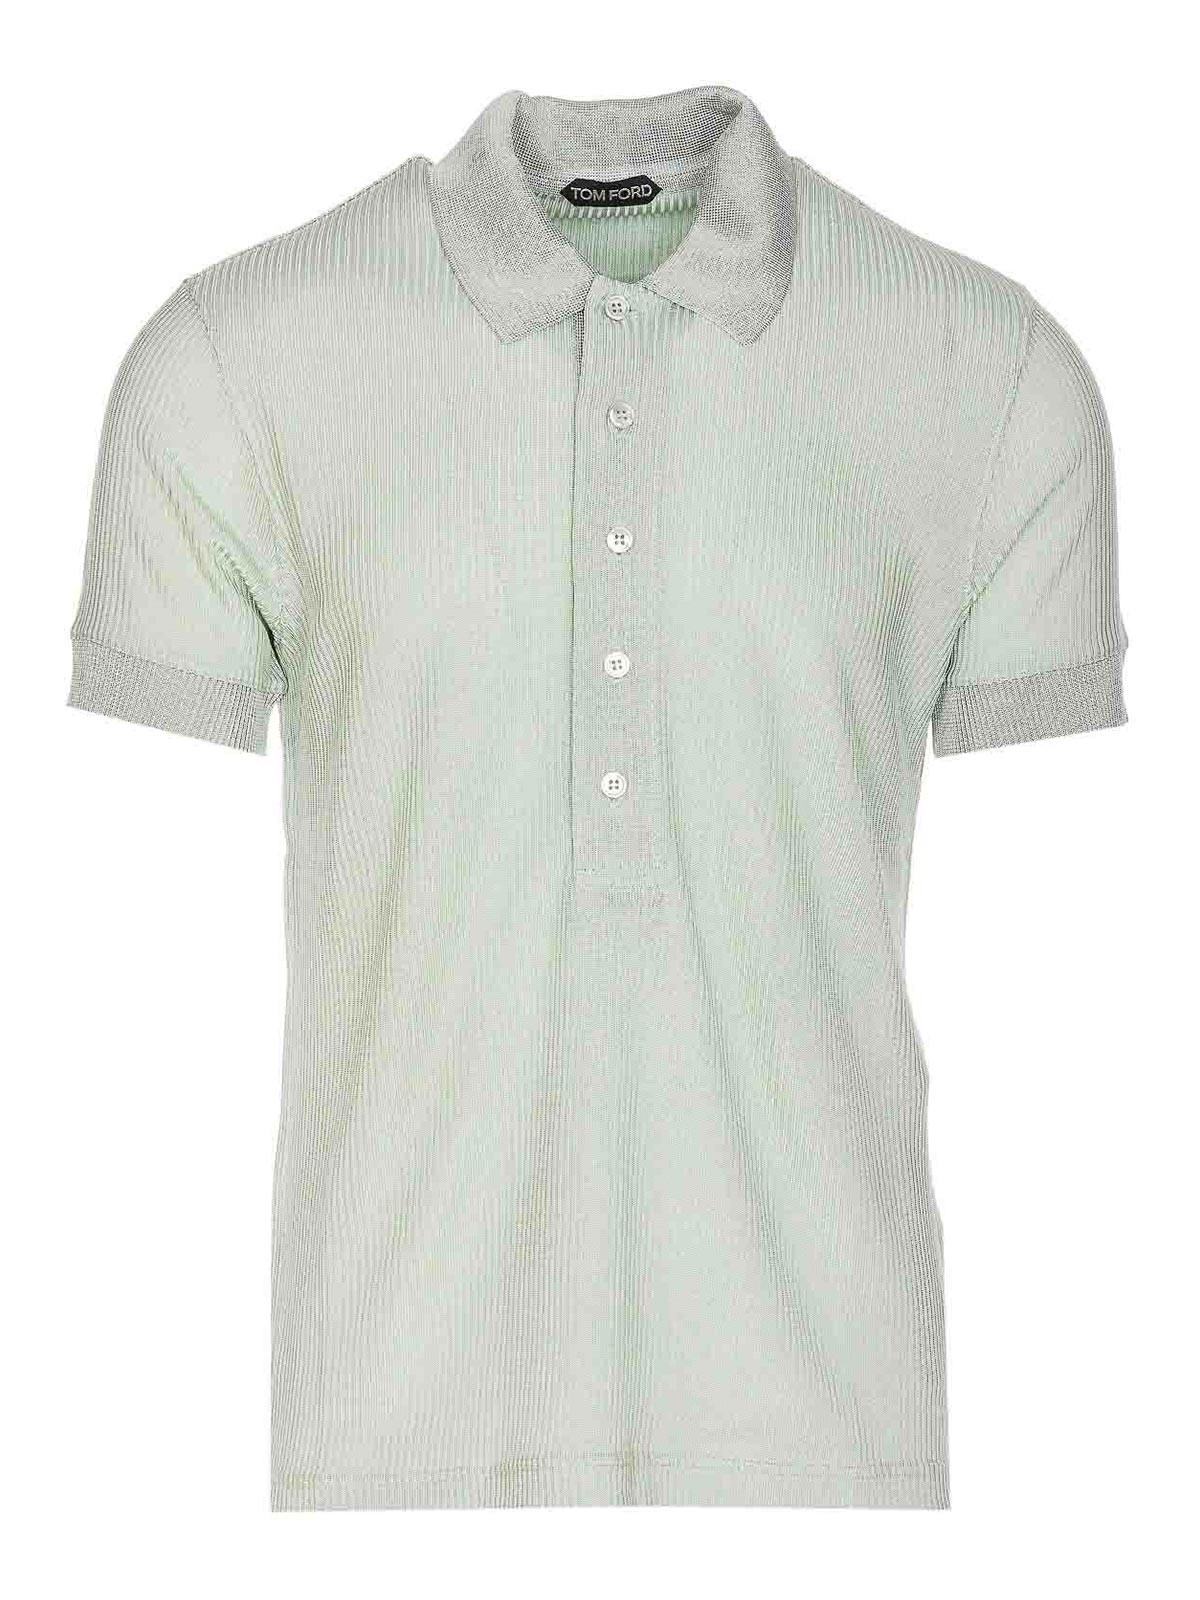 TOM FORD MINT POLO FRONTAL BUTTONS REGULAR